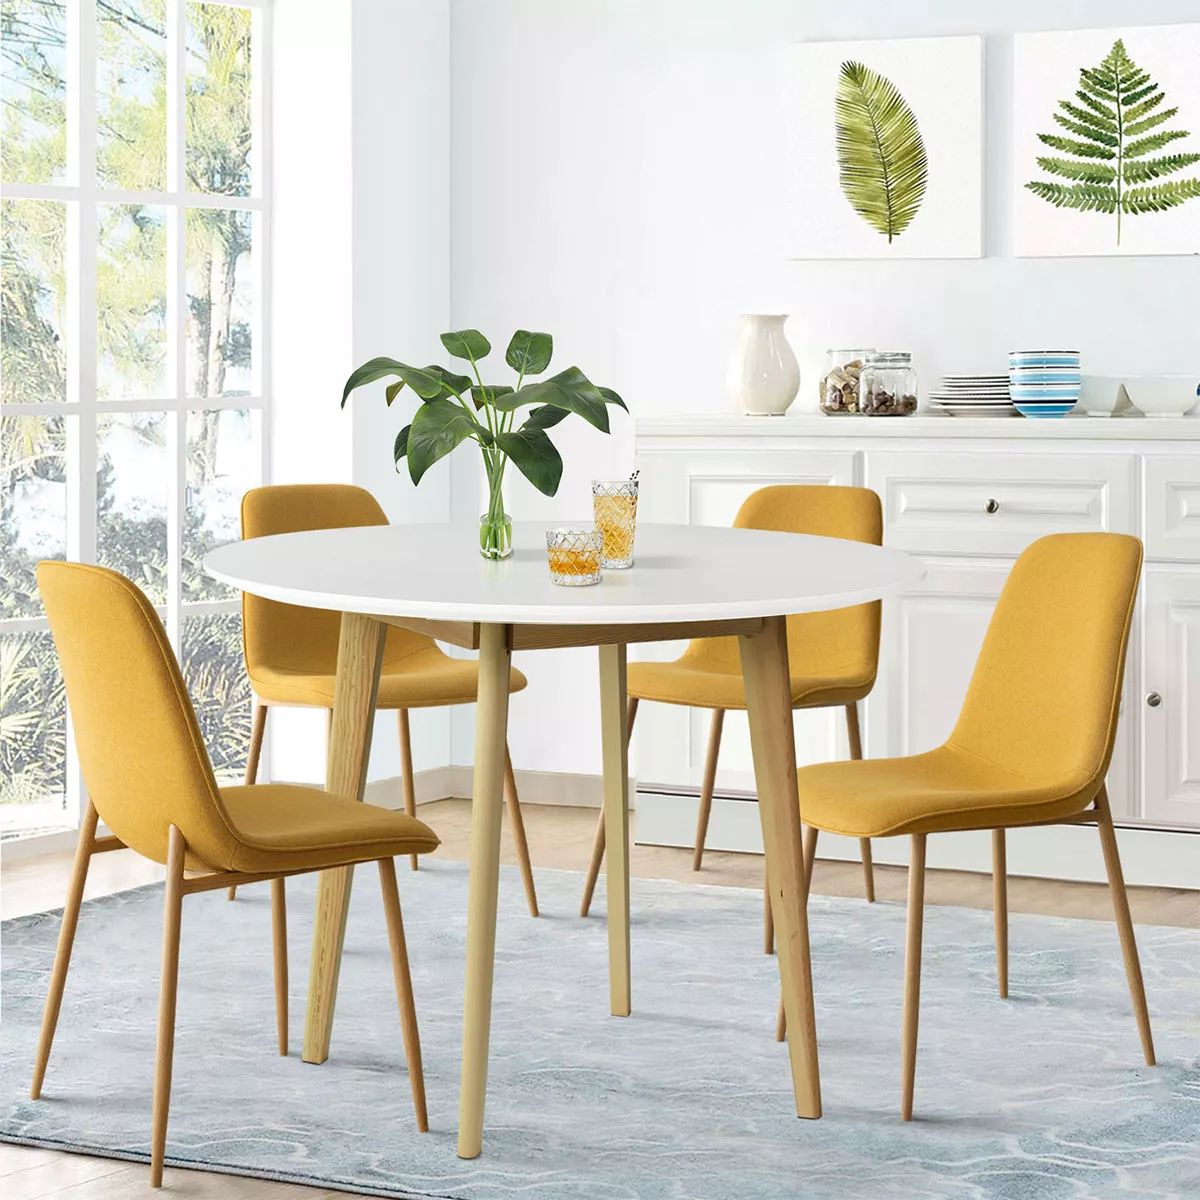 Norman+Oslo 5 Piece Small Round Table With Chairs,Home Kitchen Round Dining Table with Thick Tabl... | Target